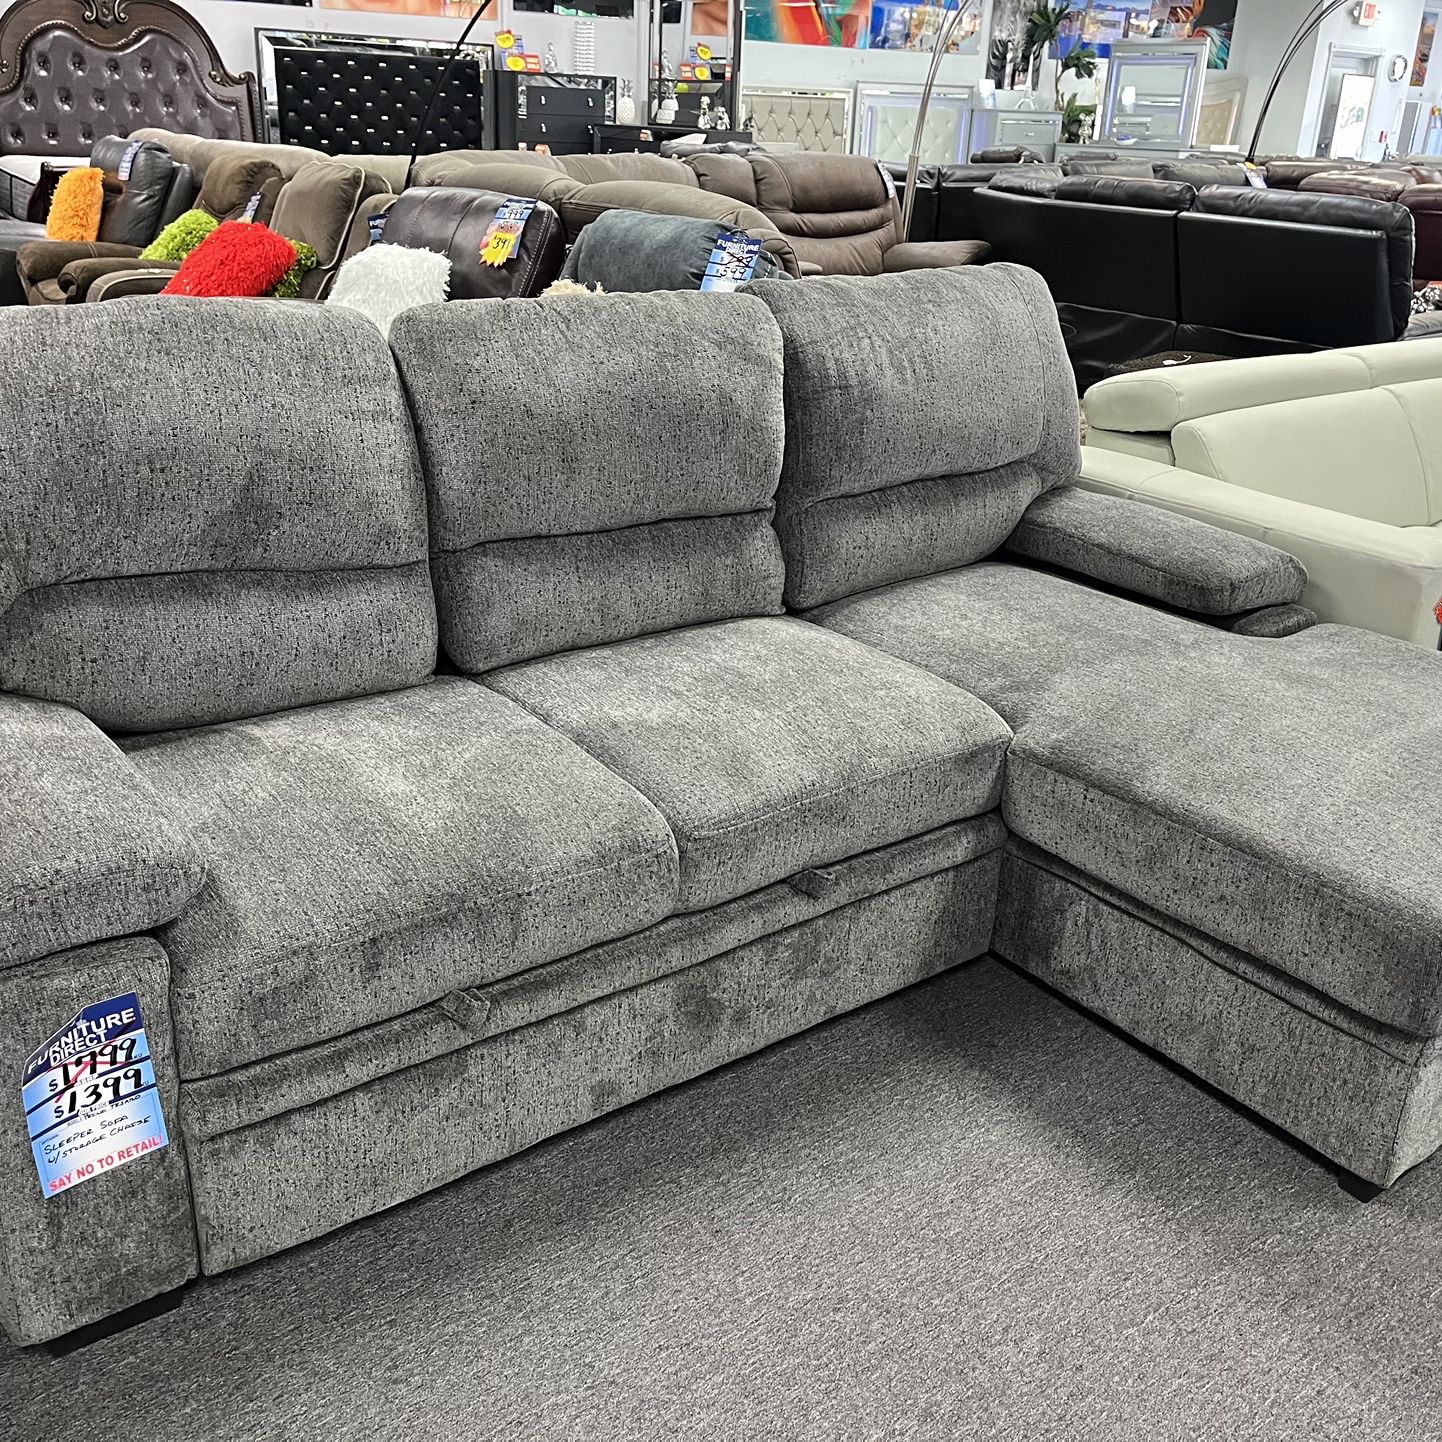 SLEEPER SOFA L SECTIONAL LIVING ROOM SET STORE CLOSING EVERYTHING MUST GO ONLY $53 INITIAL PAYMENT 